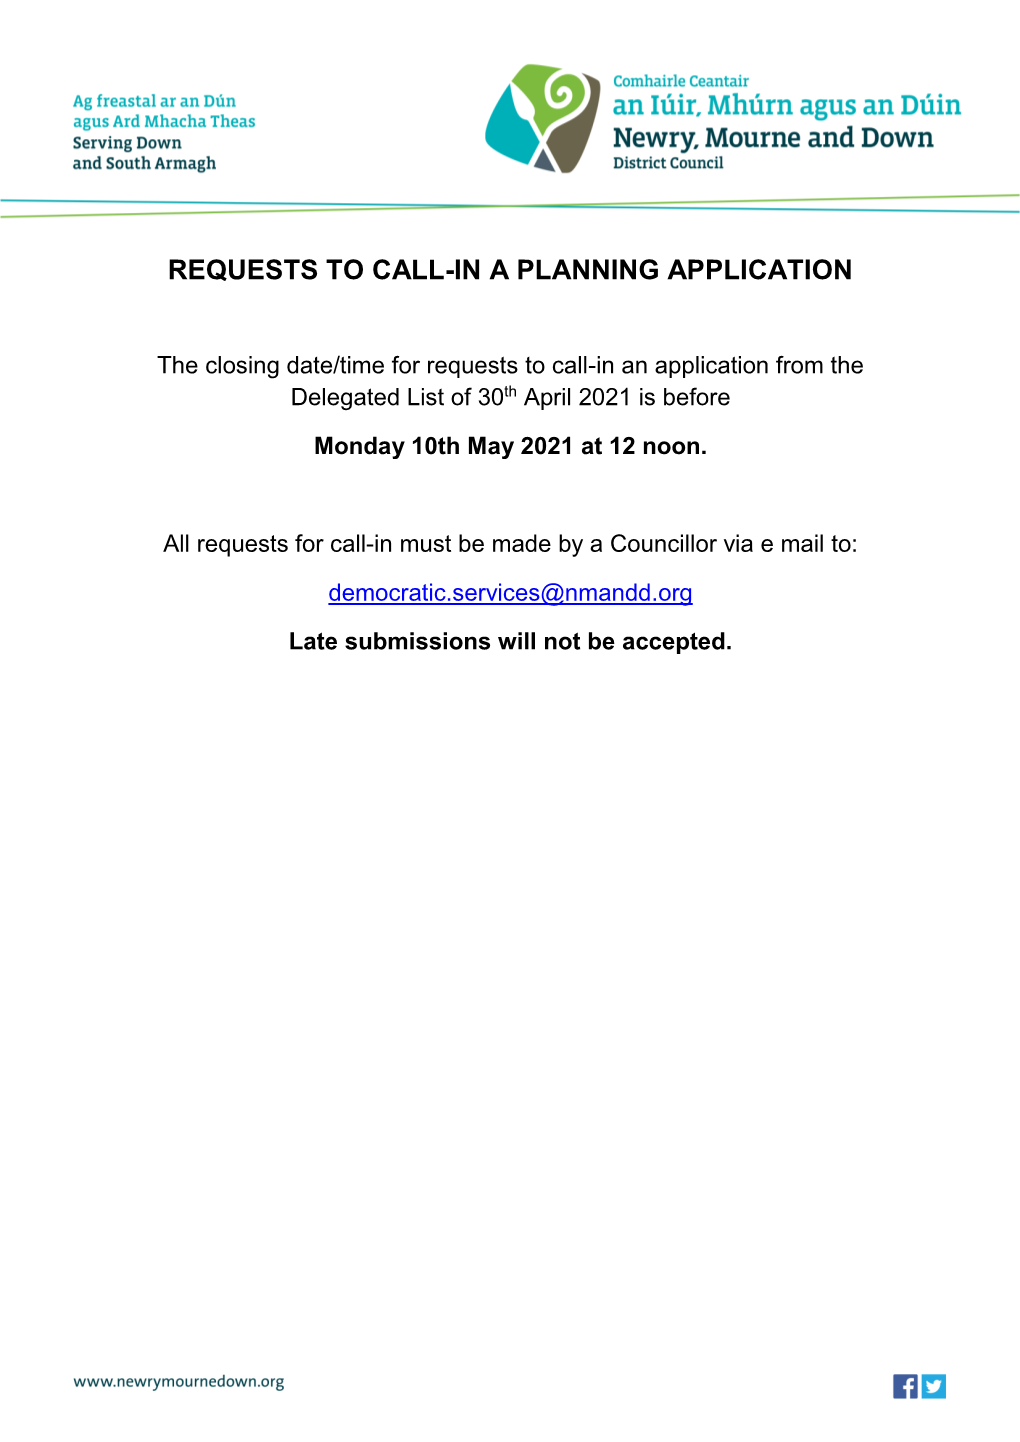 Requests to Call-In a Planning Application